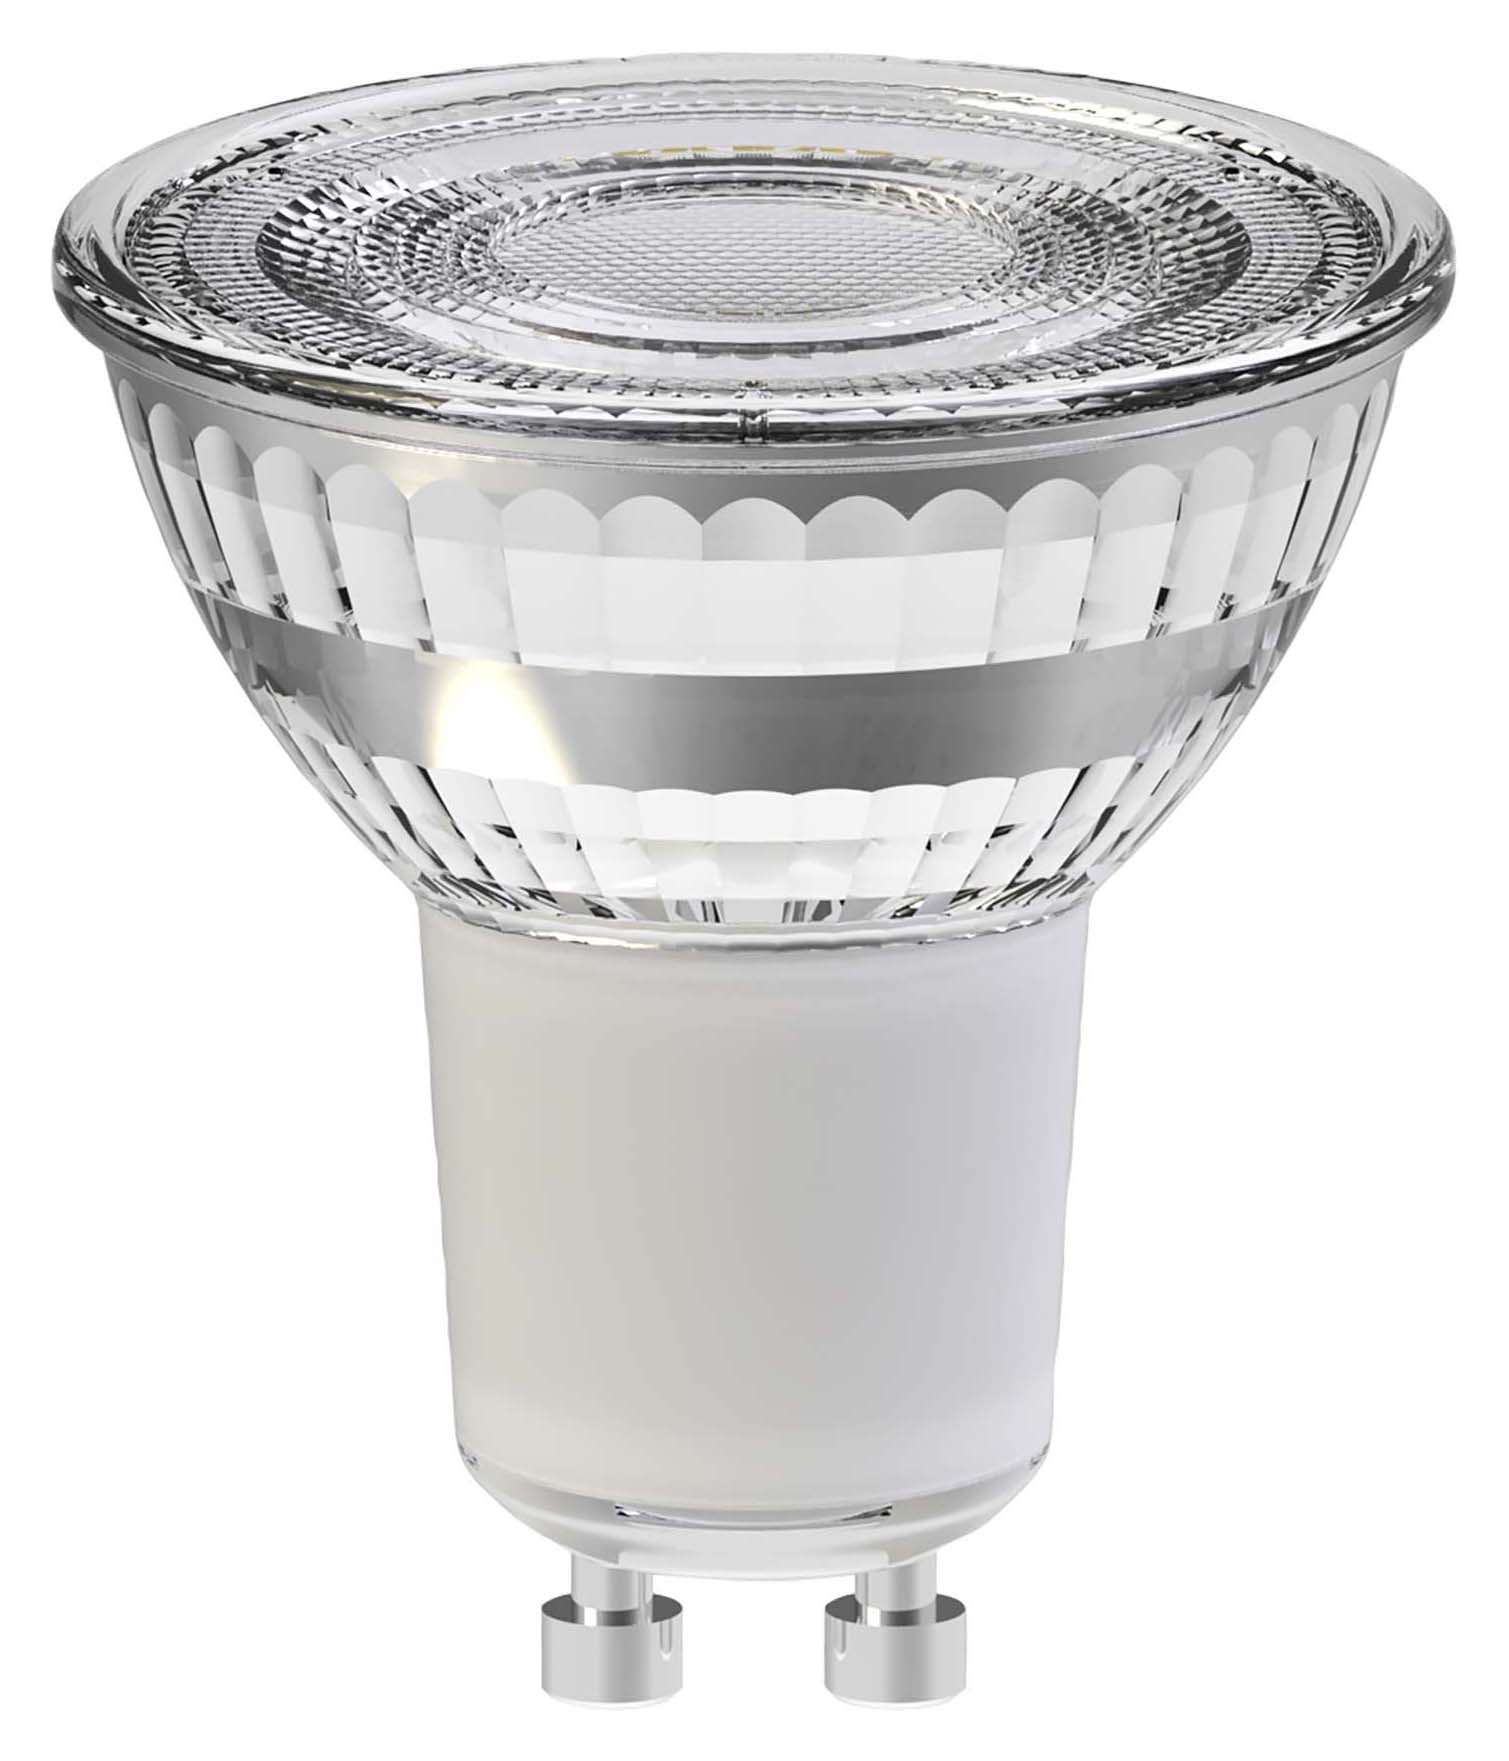 Wickes Non-Dimmable LED GU10 3.6W CCT Light Bulb